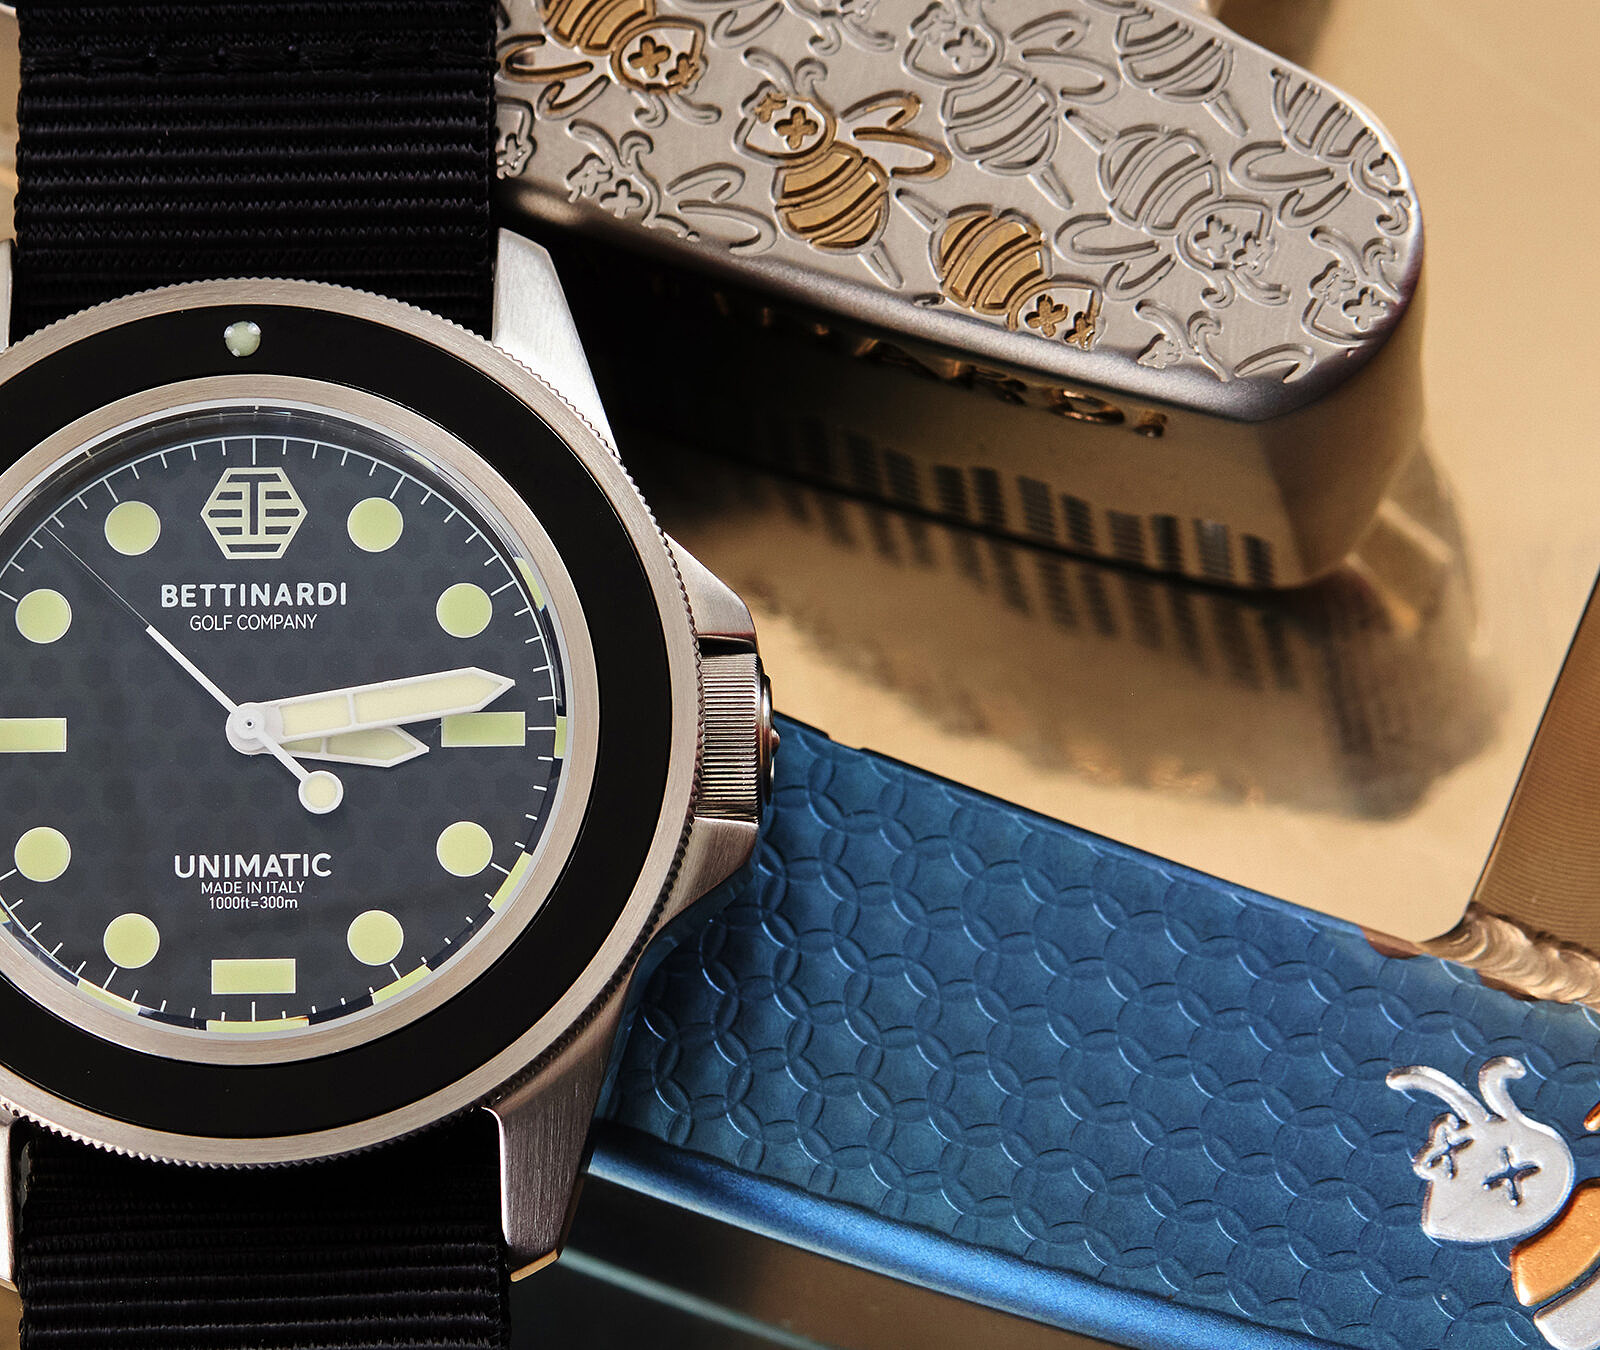 U1-BFN • UNIMATIC WATCHES – Limited edition watches